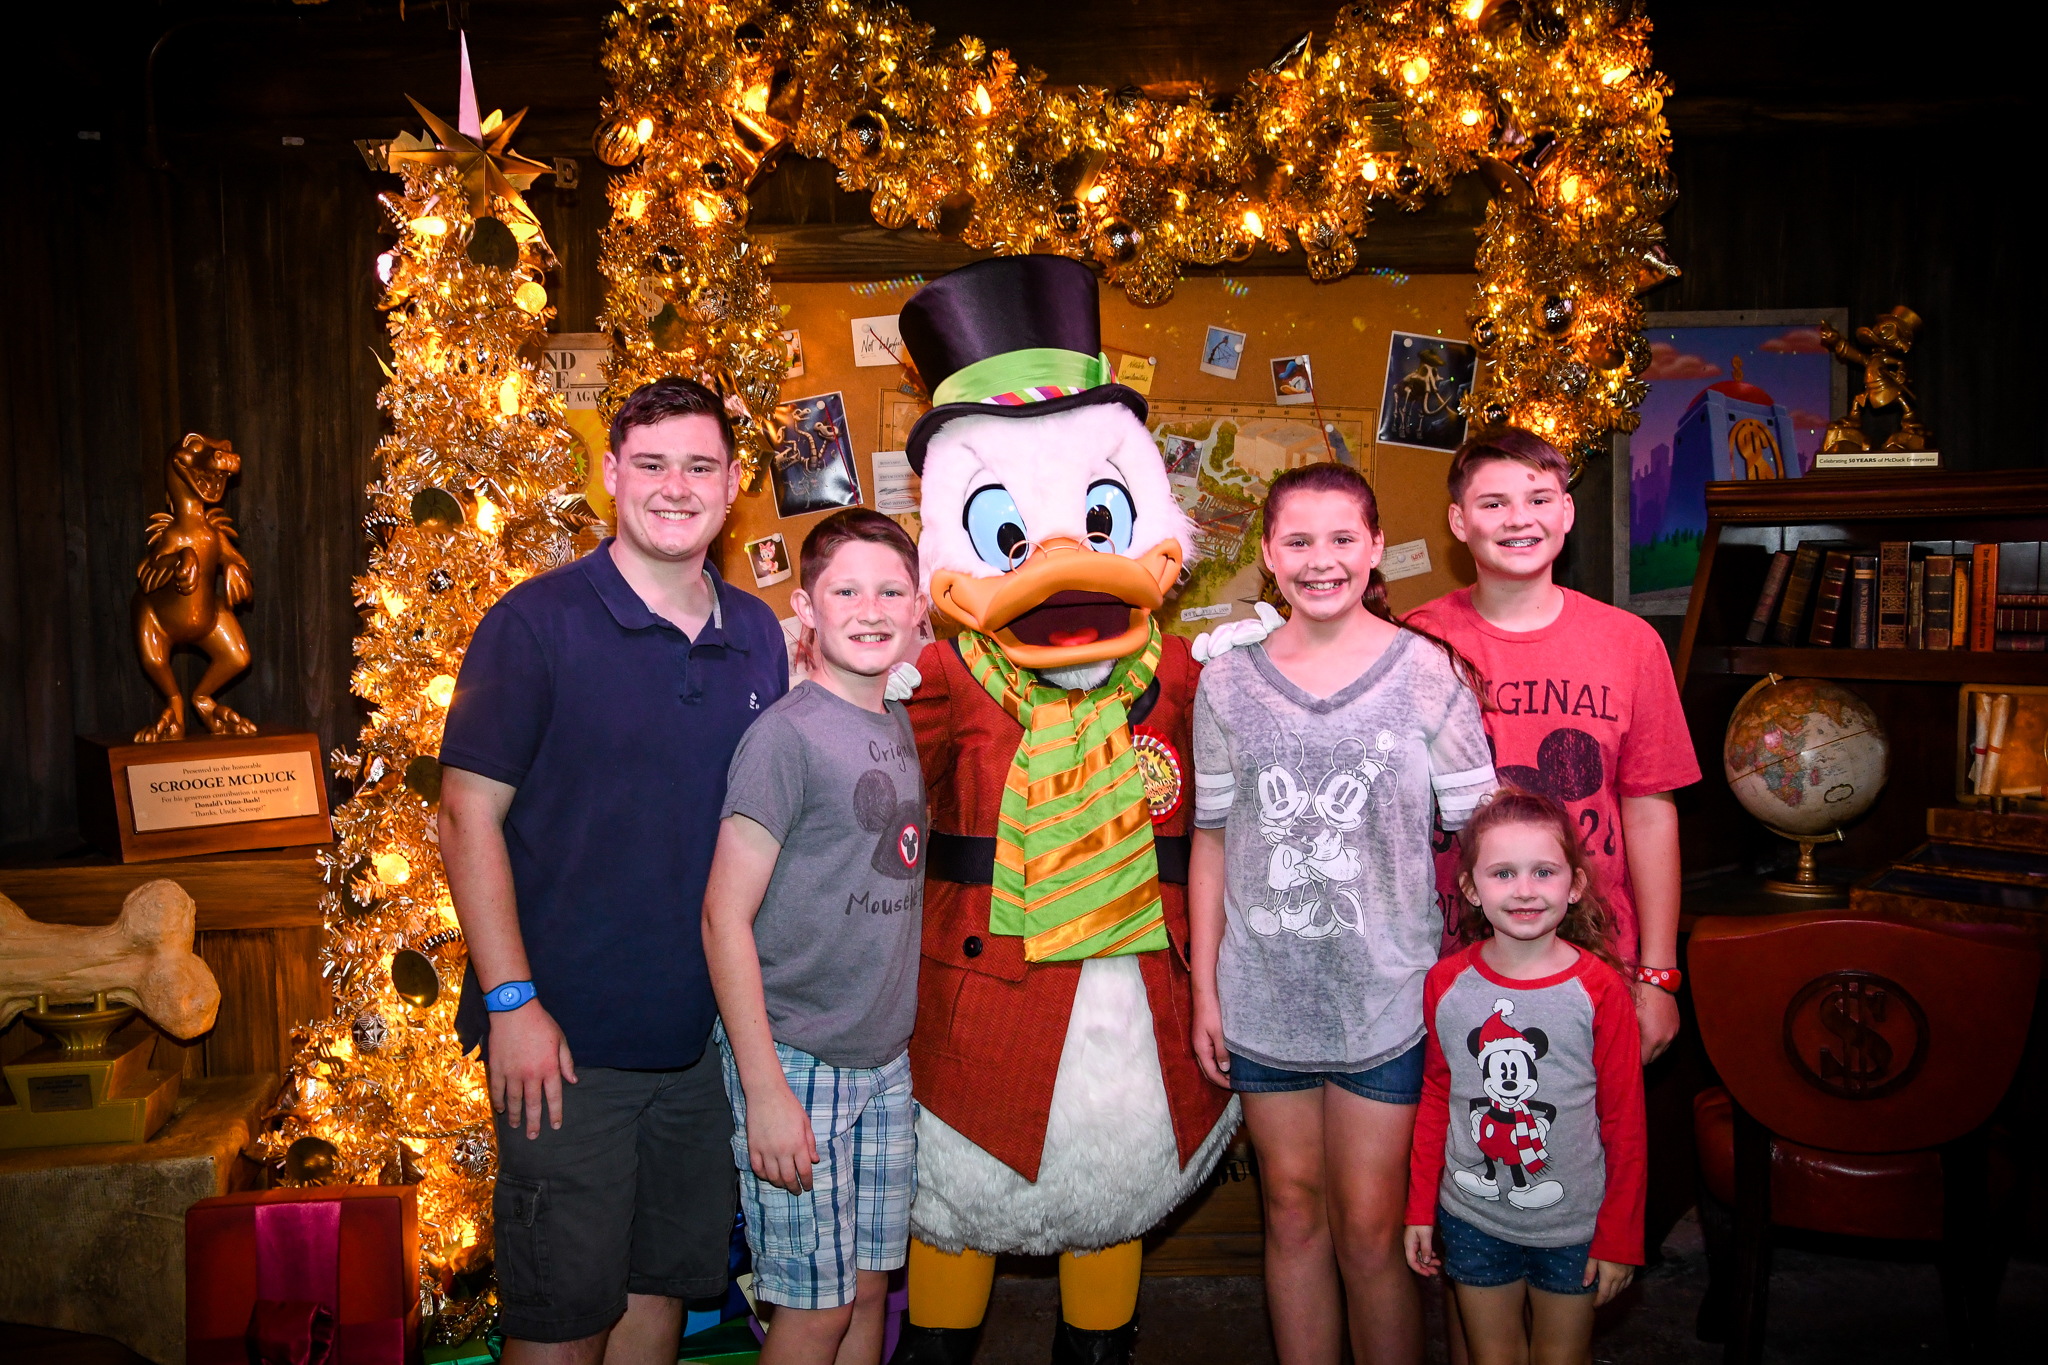 Scrooge McDuck meeting with five kids at Animal Kingdom while it's all decked out for Christmas